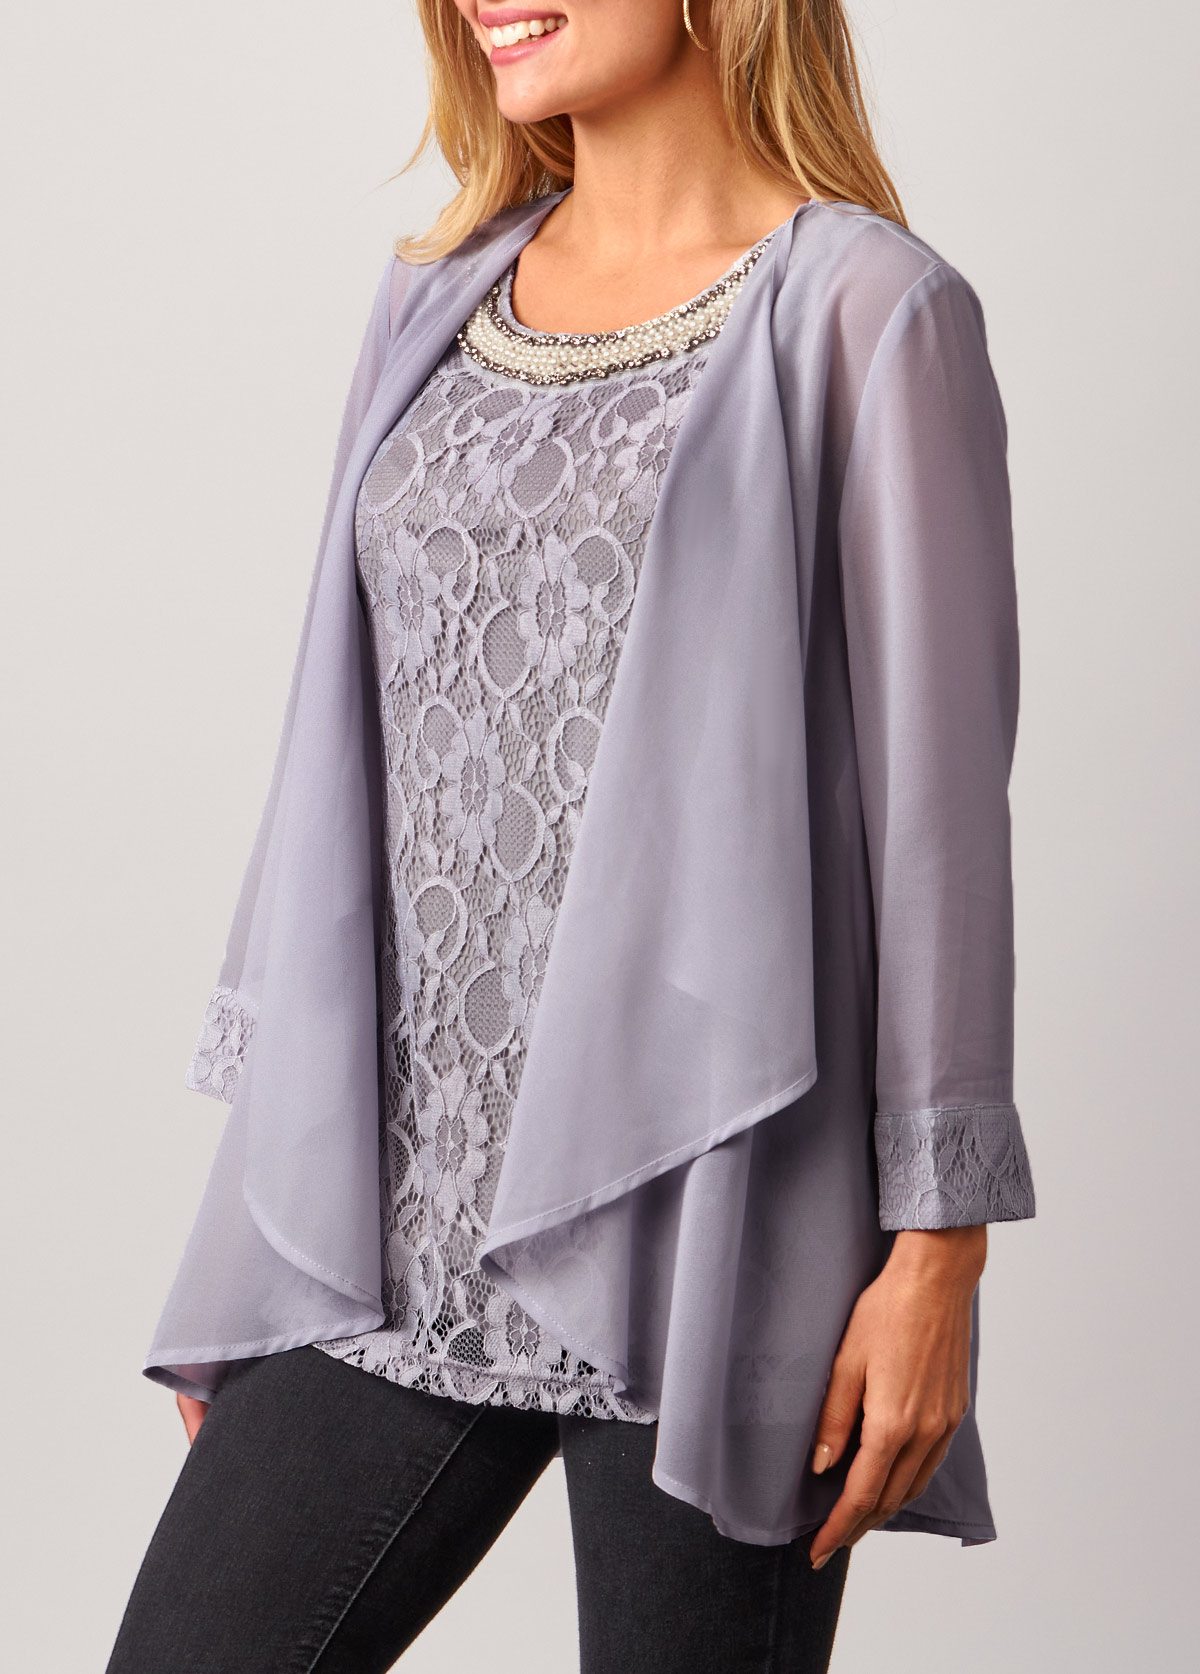 Lace Patchwork Cardigan and Grey Tank Top